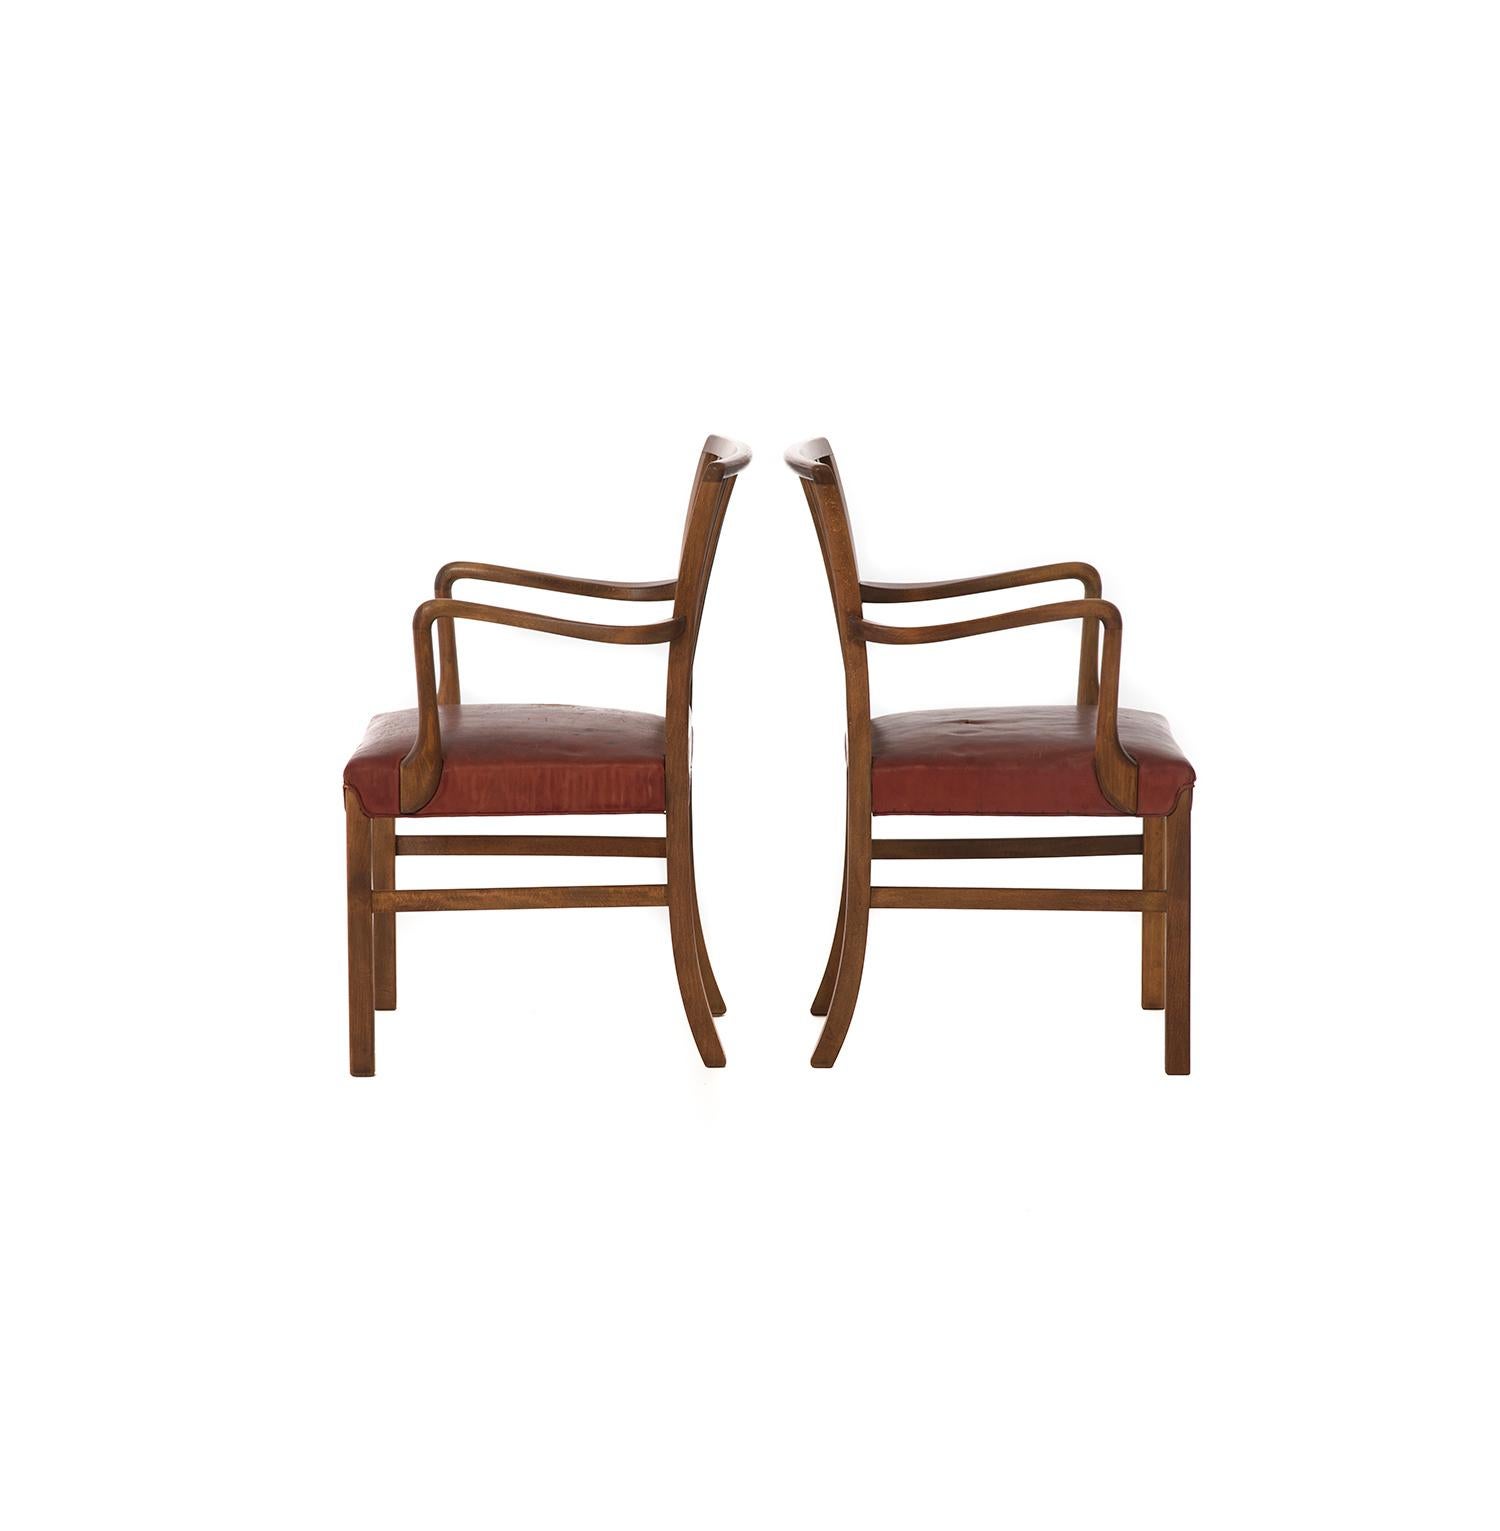 Transitional Danish Modern Occasional Chair by Ole Wanscher 1